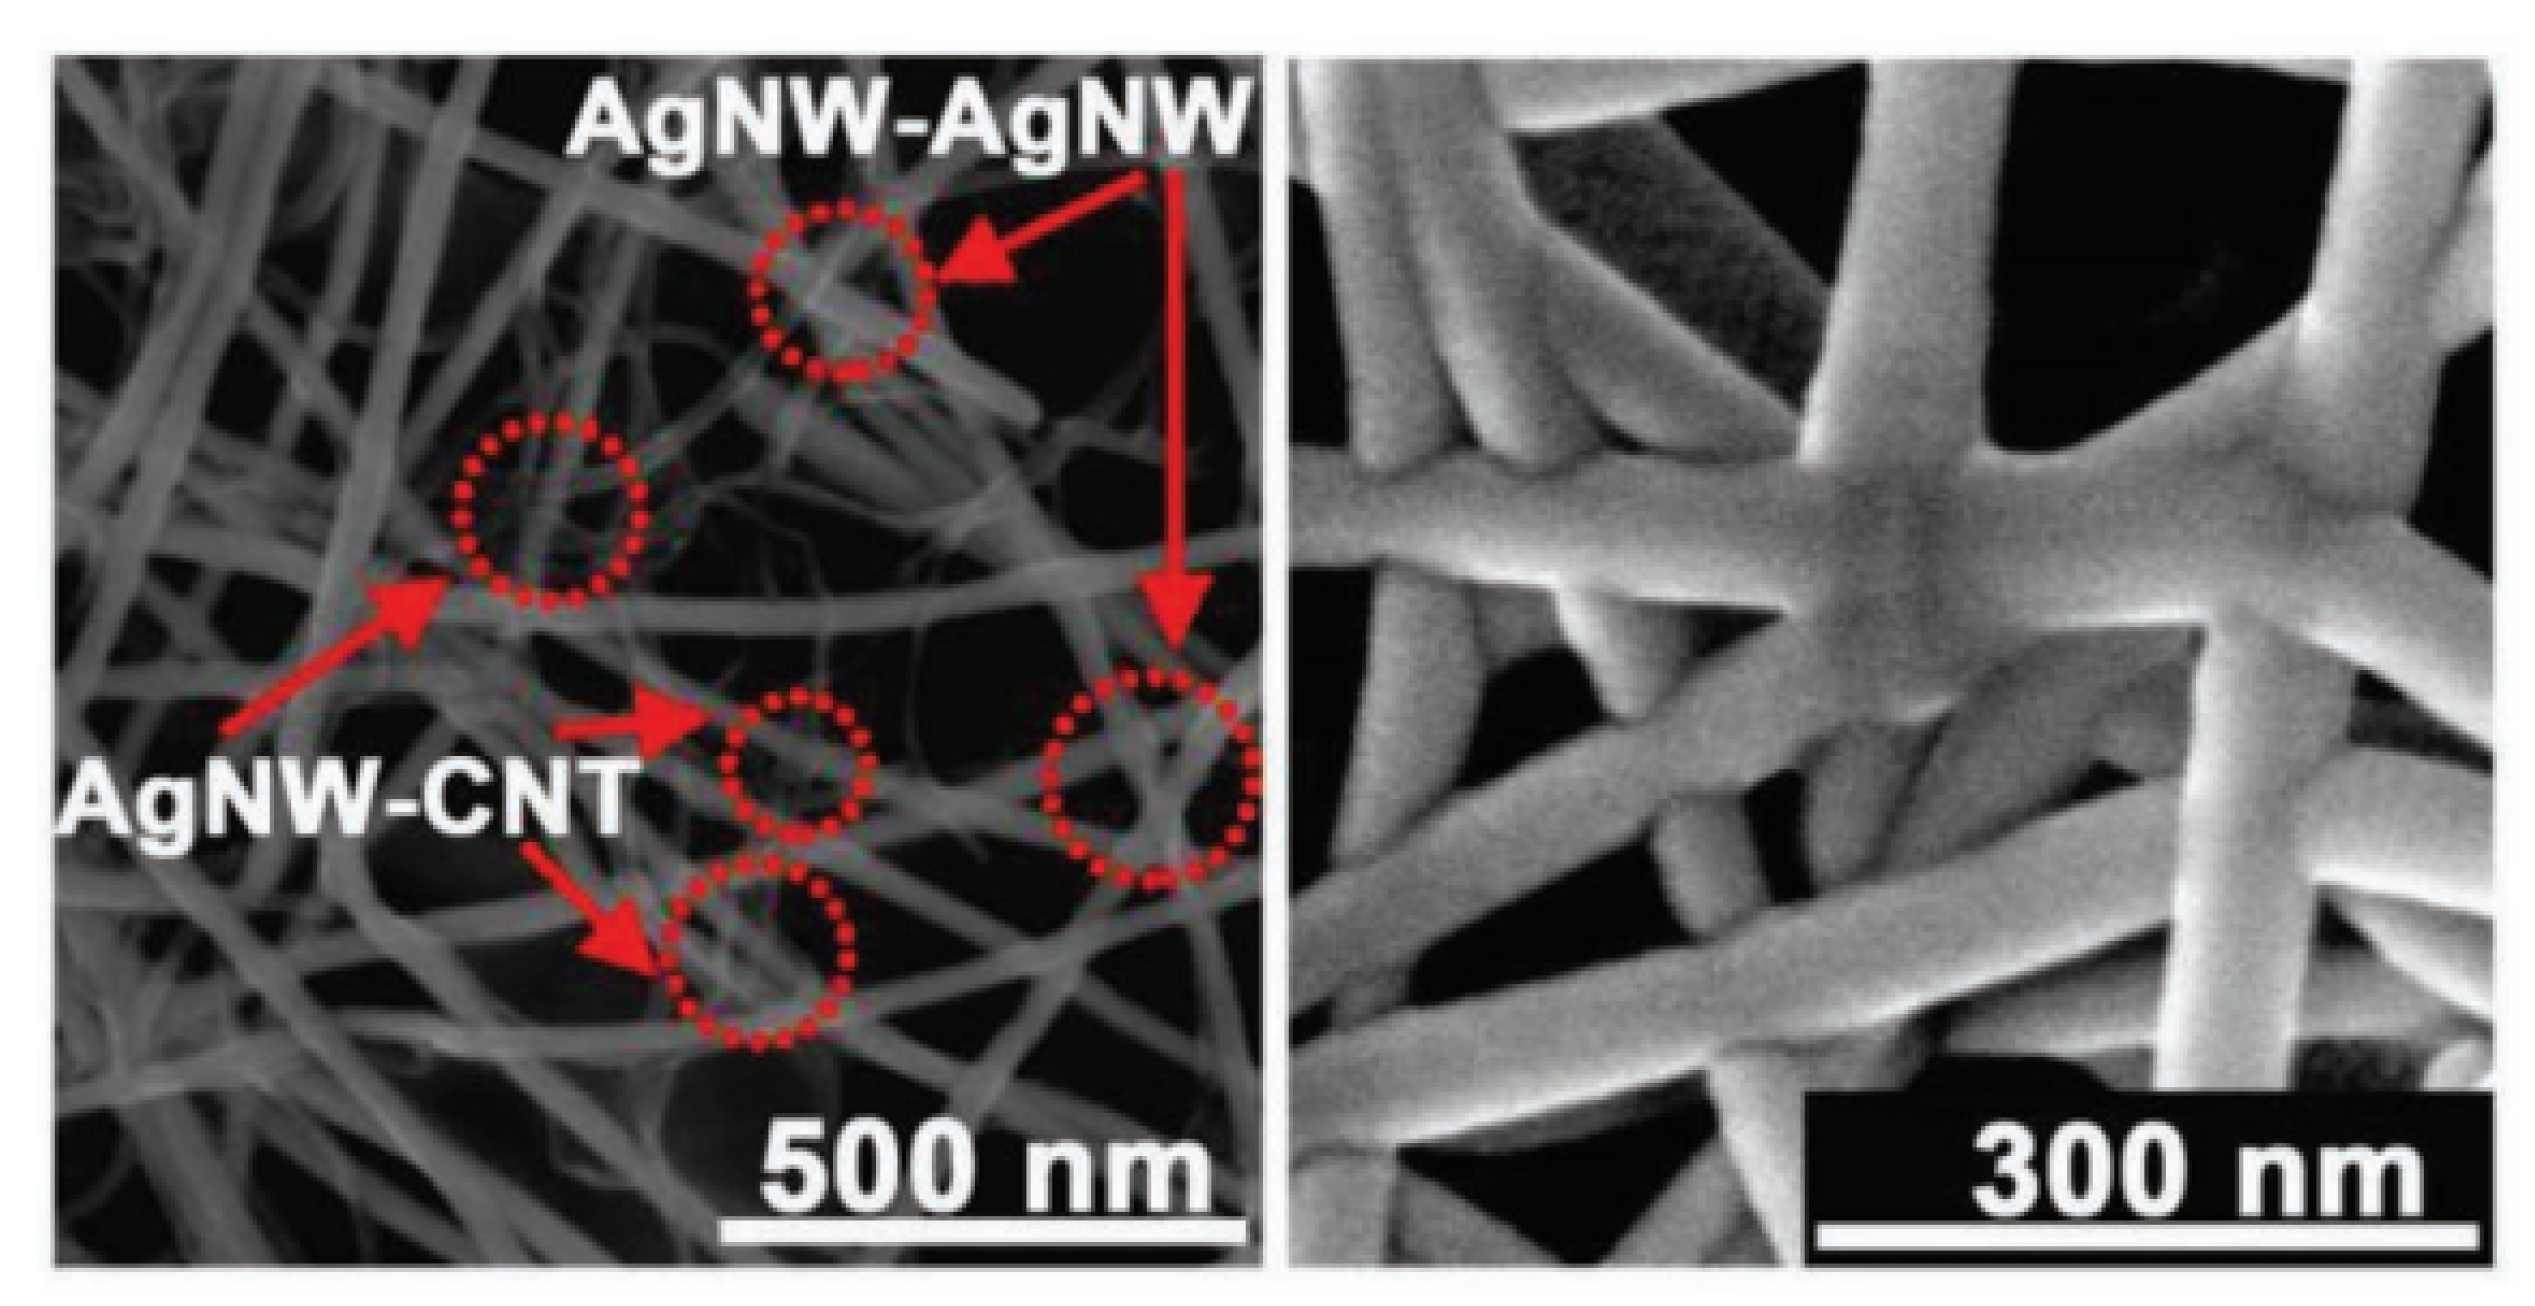 Nanowires made from silver are super stretchy